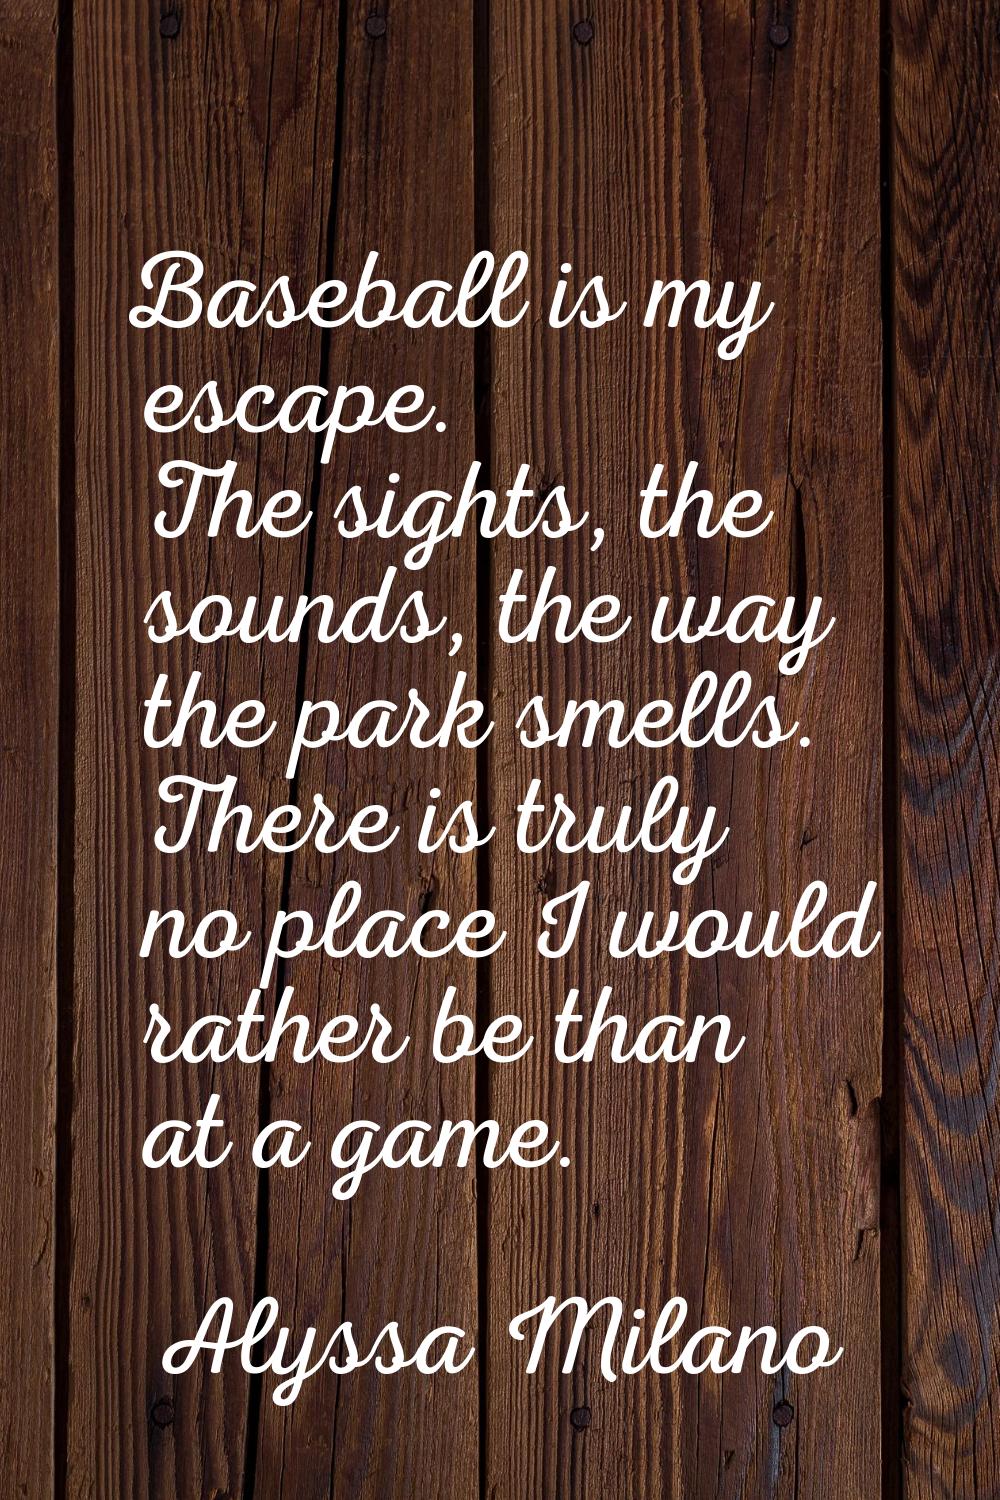 Baseball is my escape. The sights, the sounds, the way the park smells. There is truly no place I w